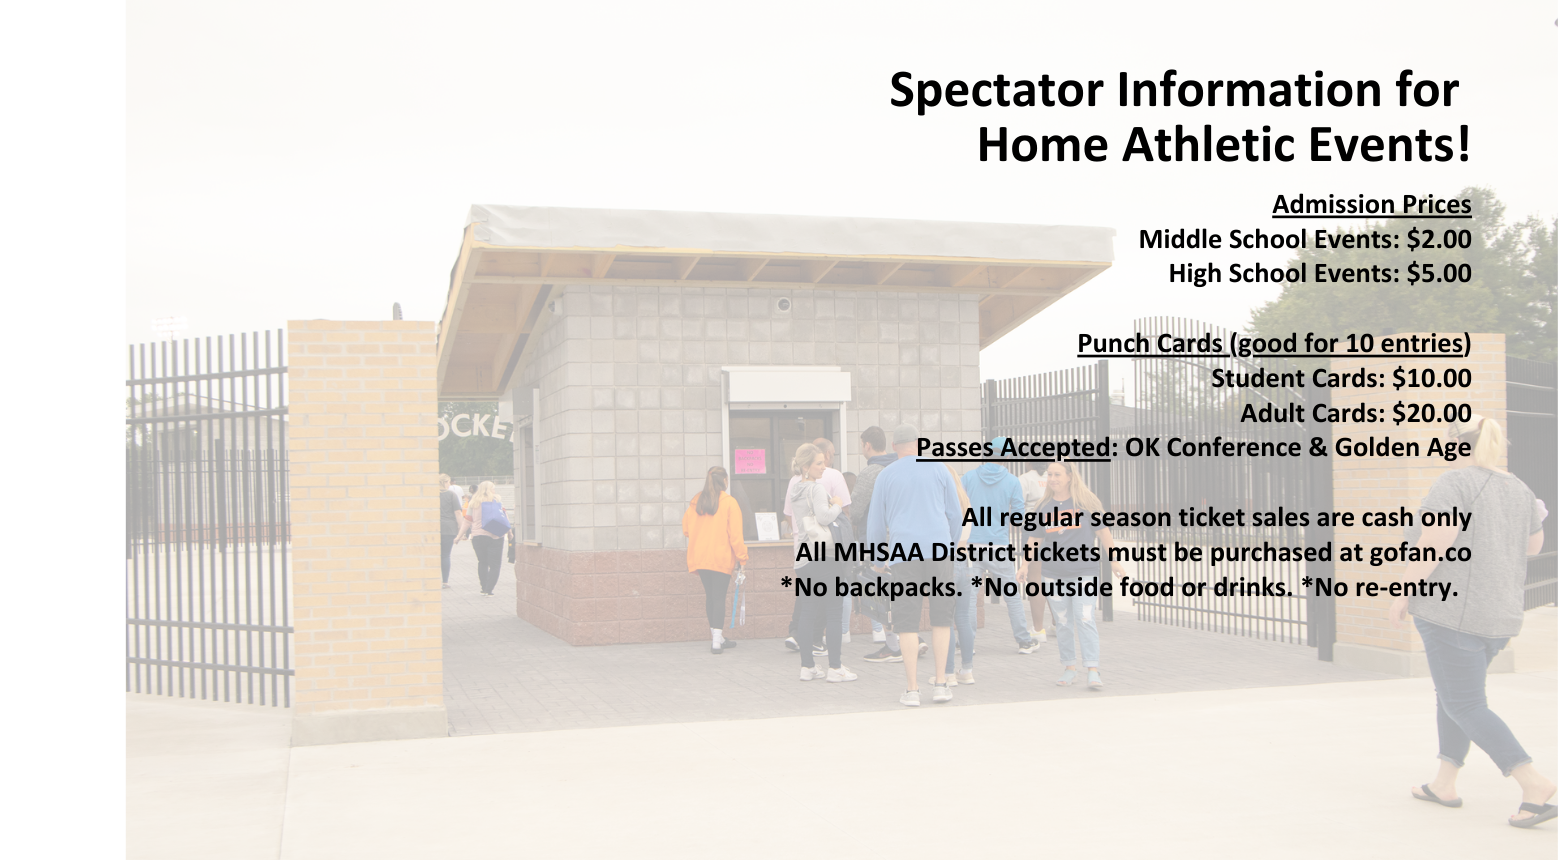 Spectator information with football field entrance backdrop